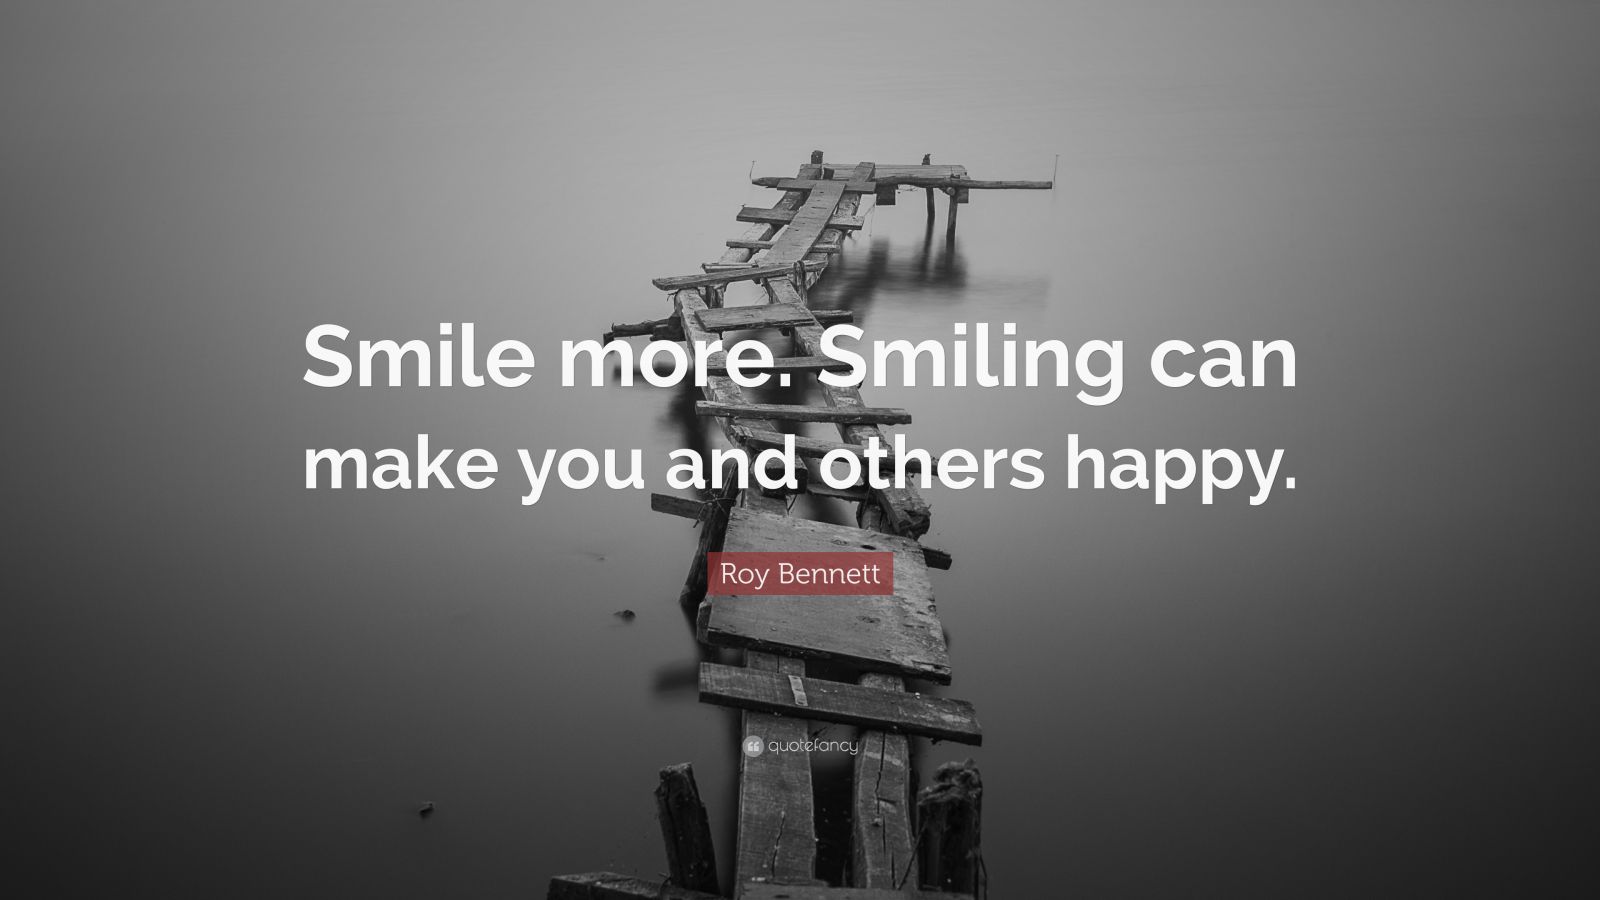 Roy Bennett Quote: “Smile more. Smiling